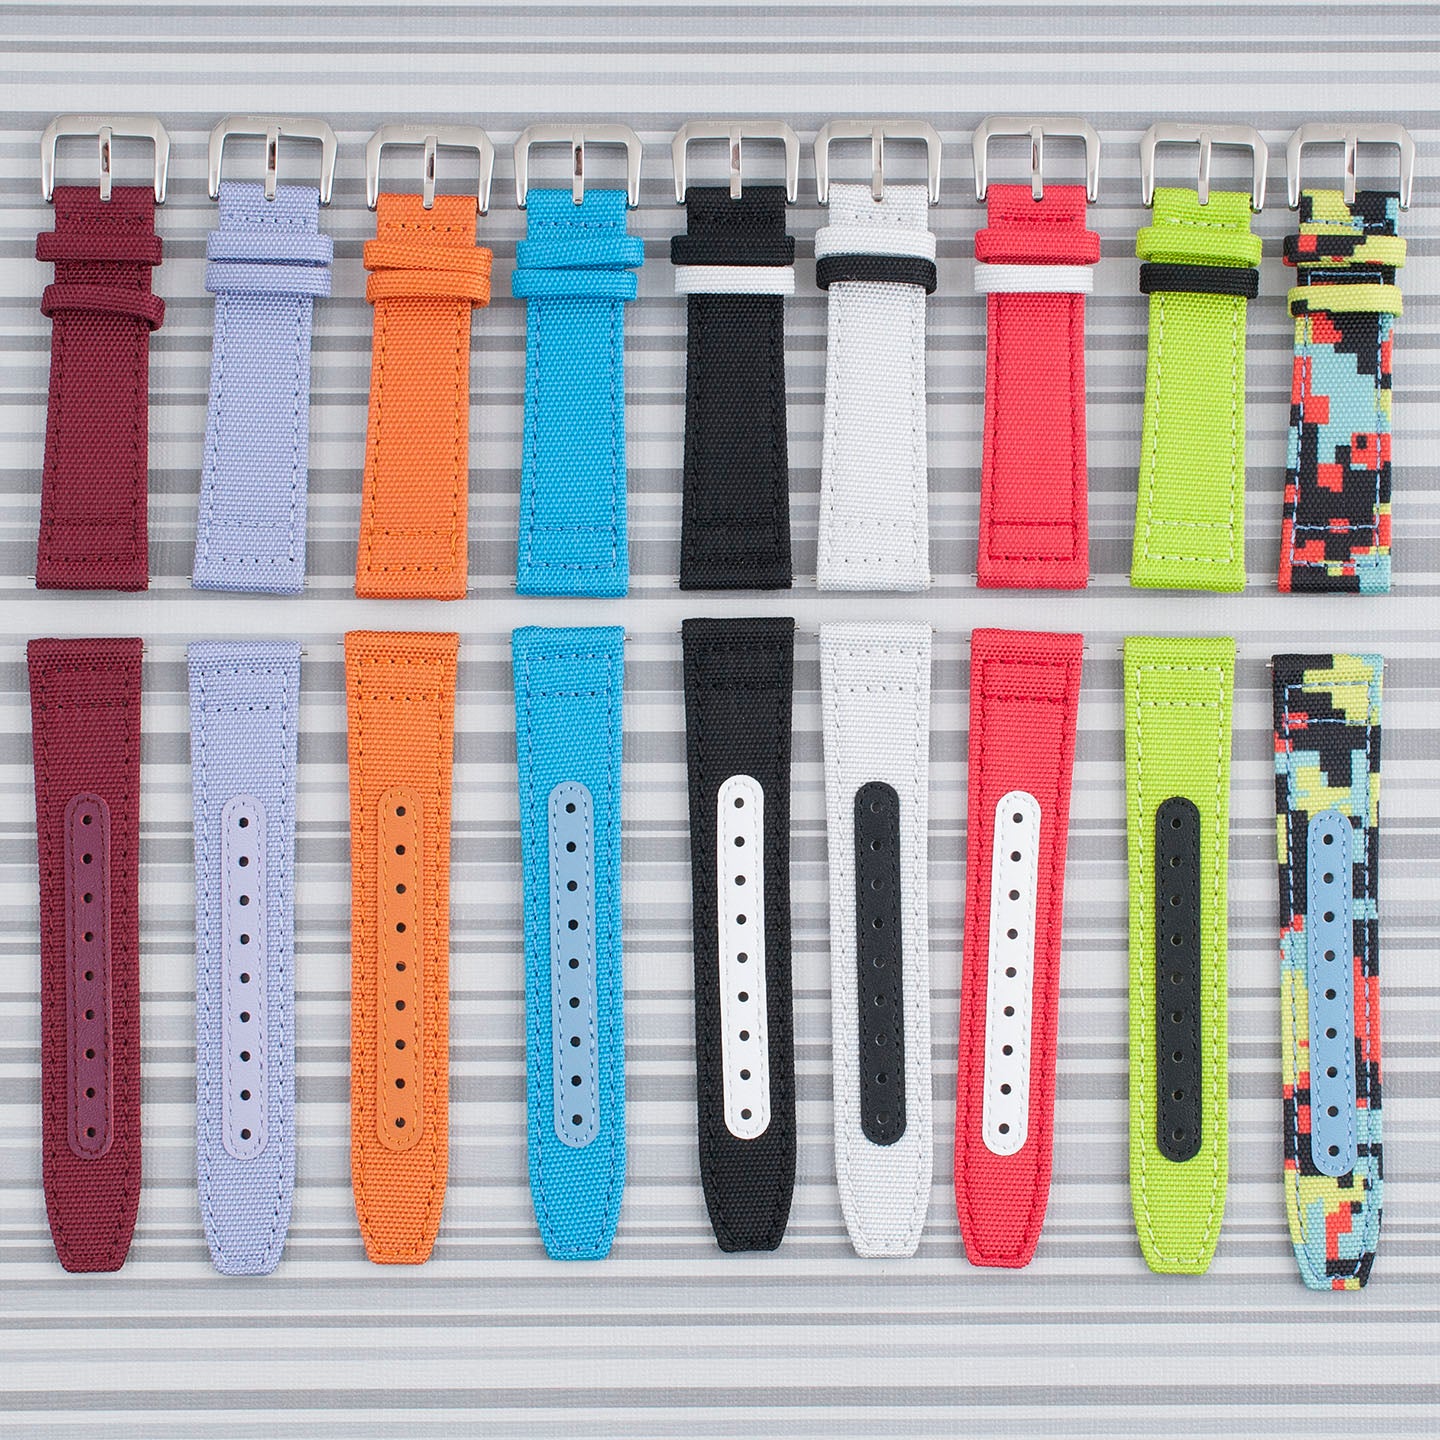 Premium Sailcloth Colorway Quick Release Watch Strap band replacement 19mm, 20mm, 21mm, 22mm for large wrists and small wrists, for men and women, unisex maroon purple orange blue black white red neon yellow green camo